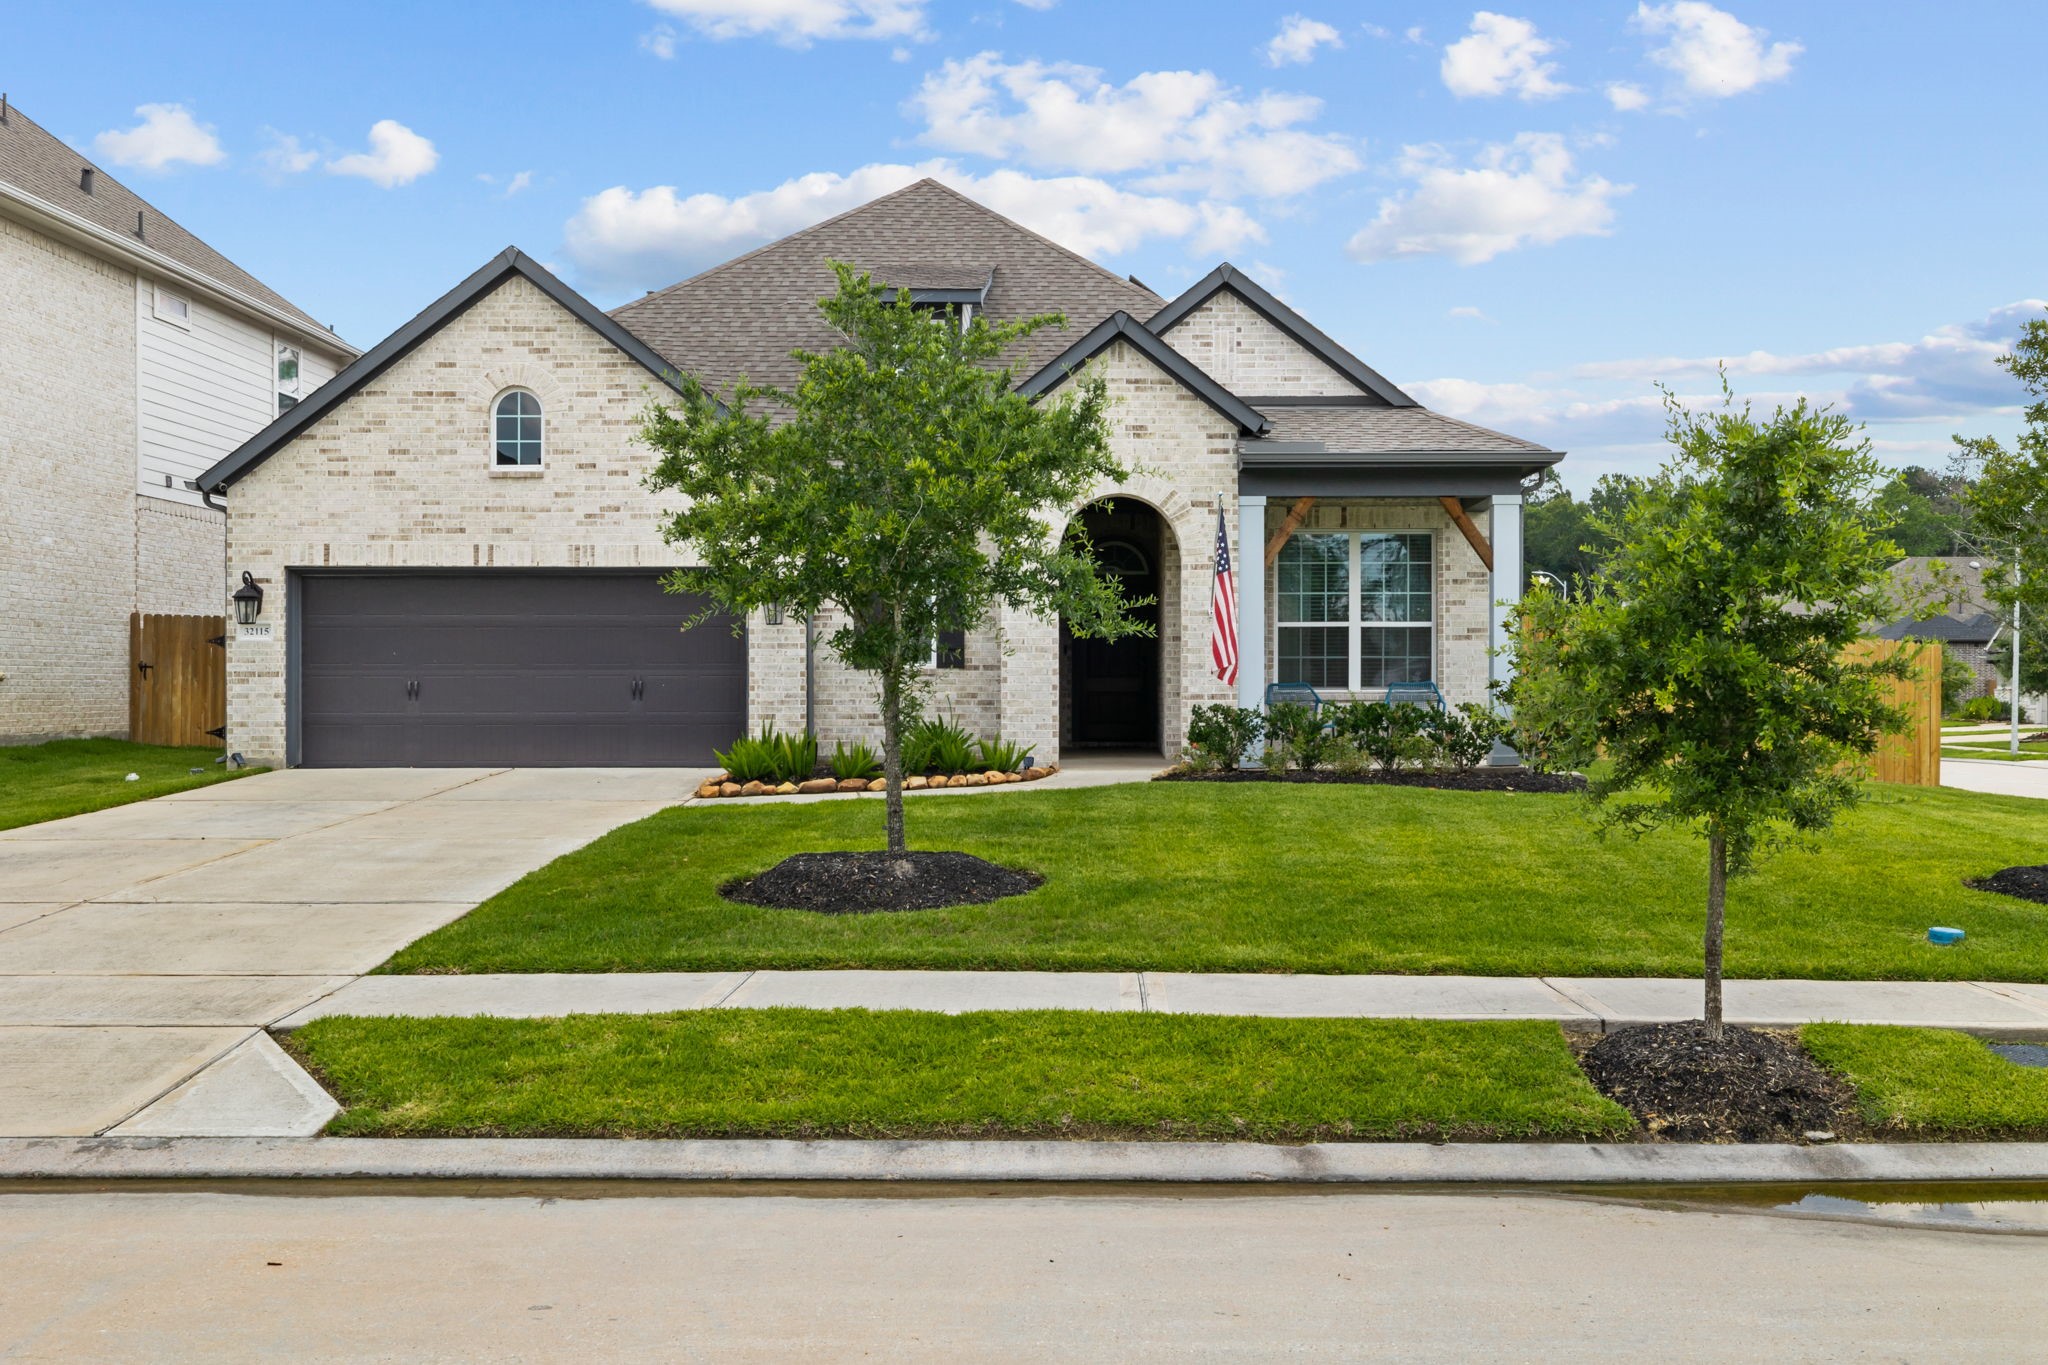 Welcome to 32115 Aspen Grover Court, a gorgeous 4 bed/3.5 bath home in the Falls at Imperial Oaks subdivision of Spring. Resting on a spacious corner lot nestled on a peaceful cul-de-sac, you'll love living among the amenities offered in the neighborhood.